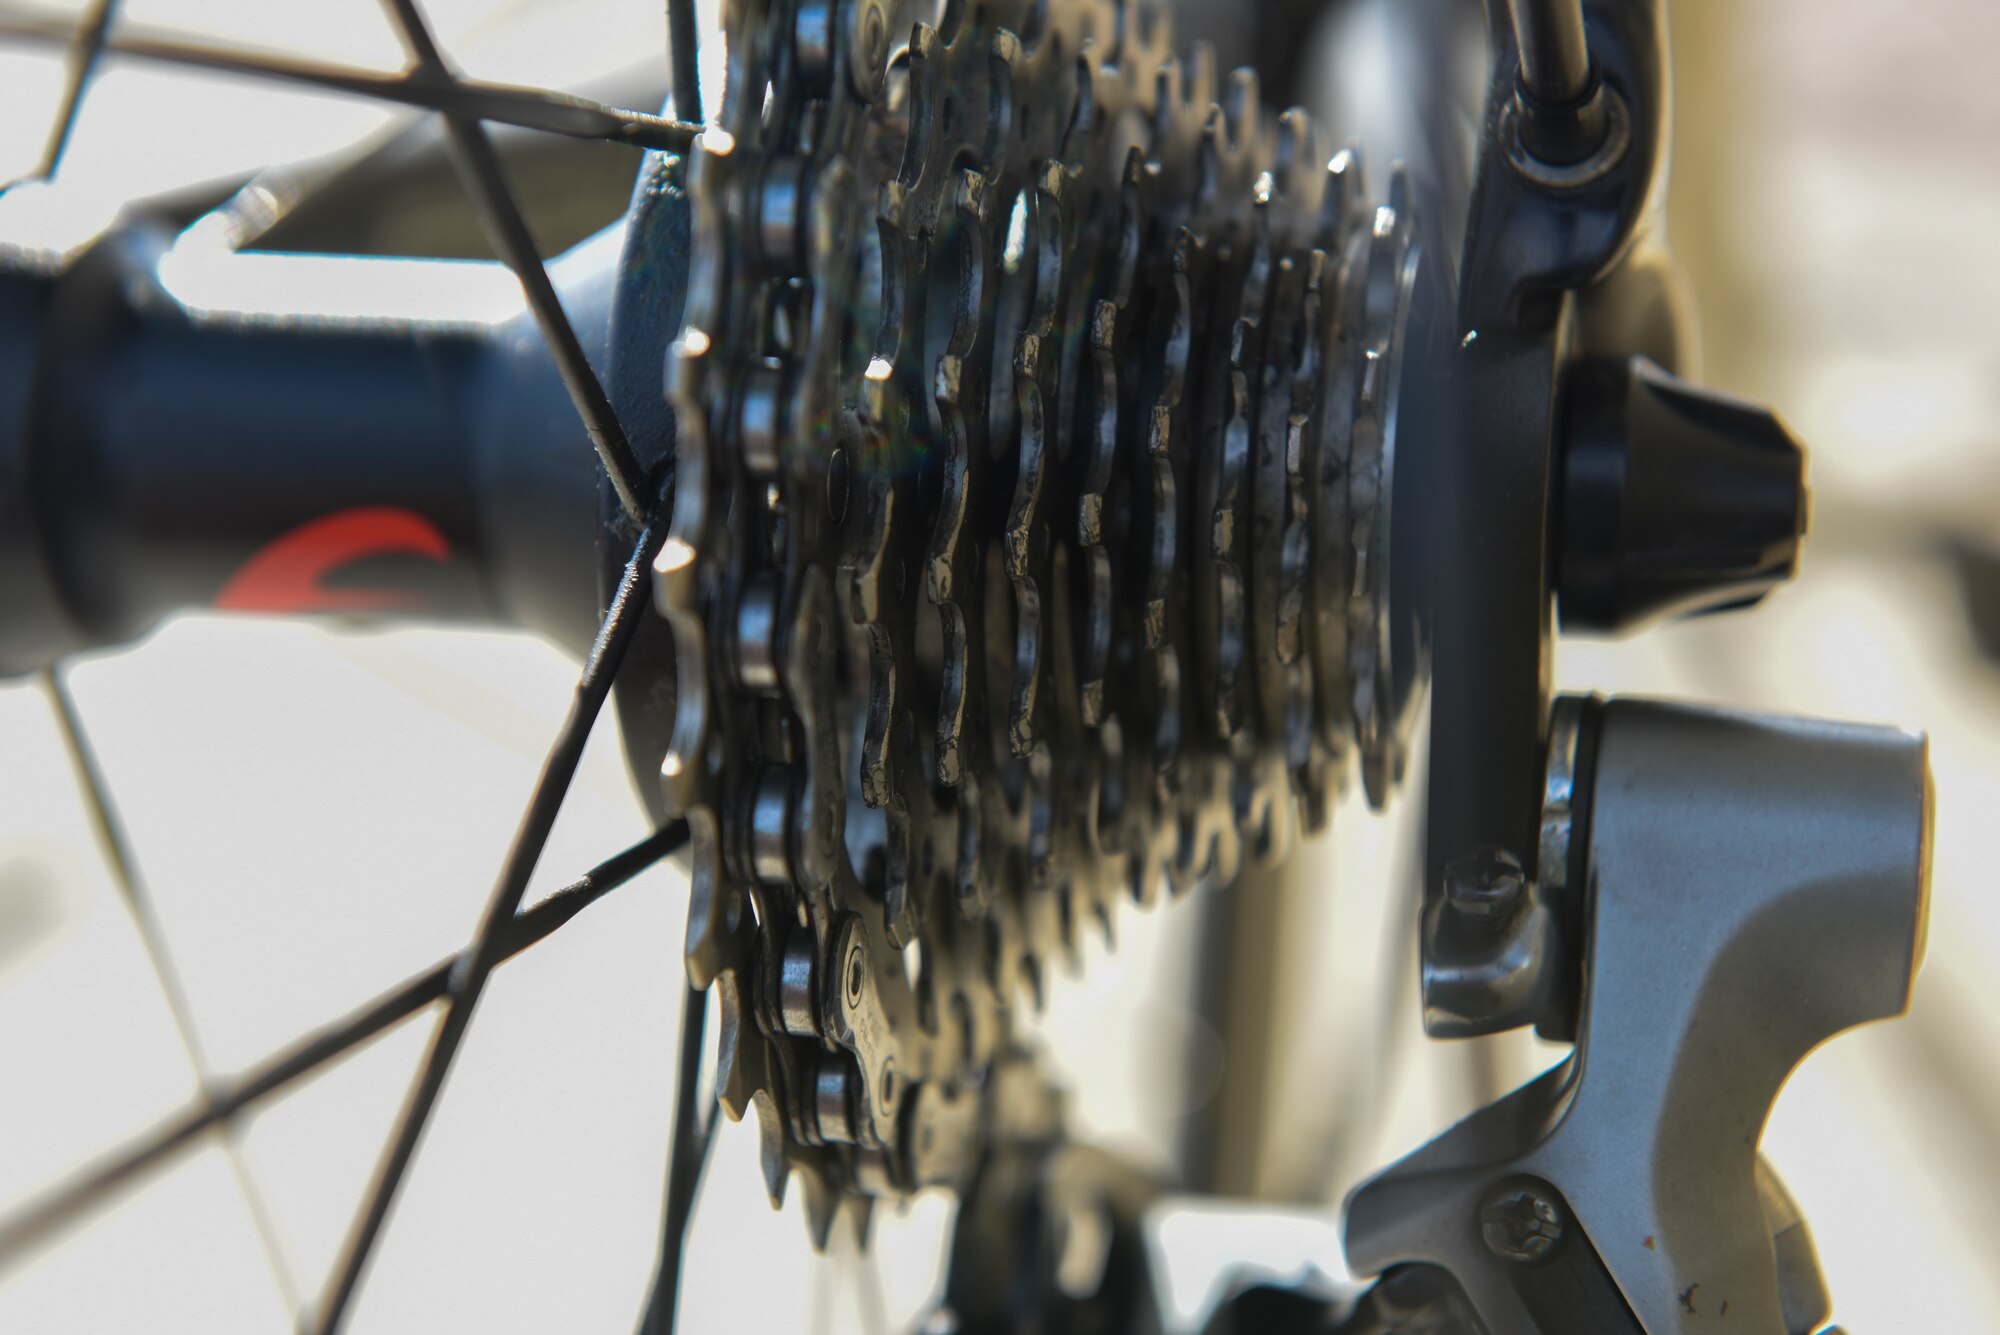 A cyclist from the bike club prepares to use a 10-speed bicycle before a bike ride June 1, 2019, at Incirlik Air Base, Turkey. The different gears enable cyclists to maintain a comfortable pedaling speed while riding on different terrains and gradients. (U.S. Air Force photo by Staff Sgt. Matthew J. Wisher)